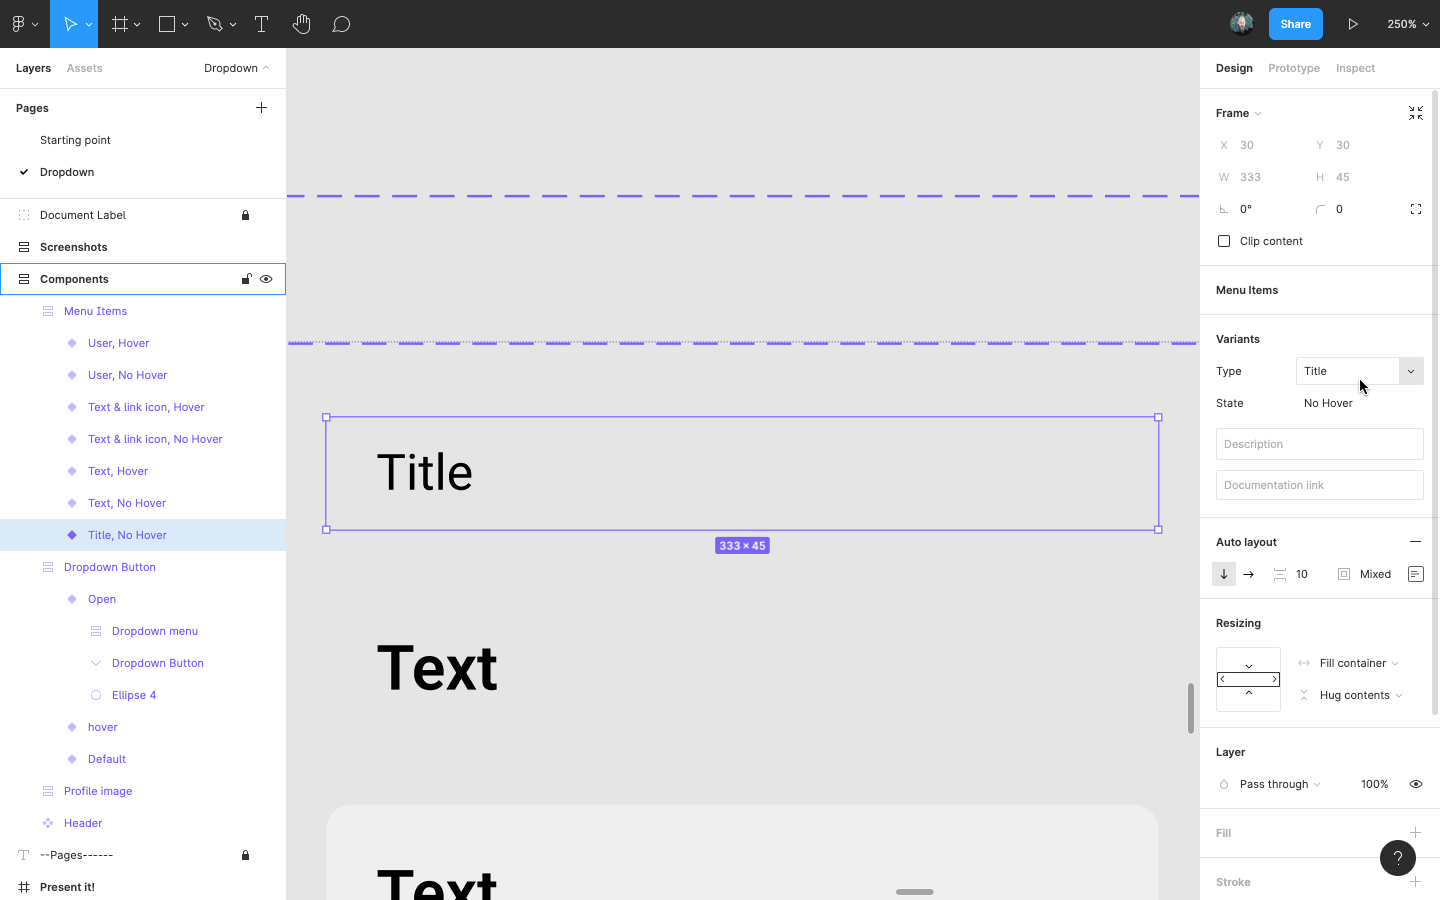 Create the menu item component, starting with a text variant